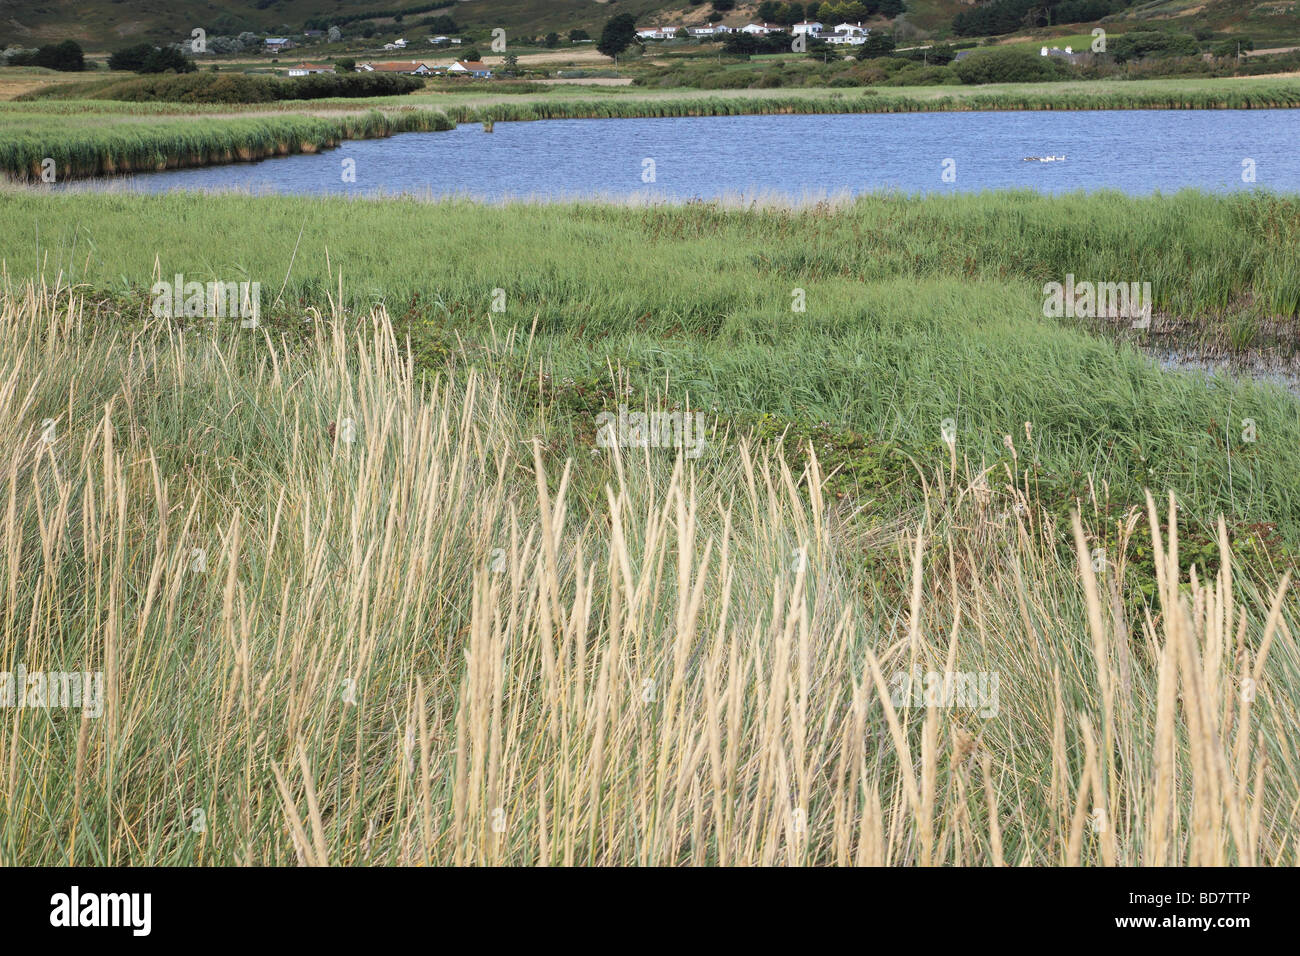 St. Ouen's Pond Jersey Channel Islands Stock Photo